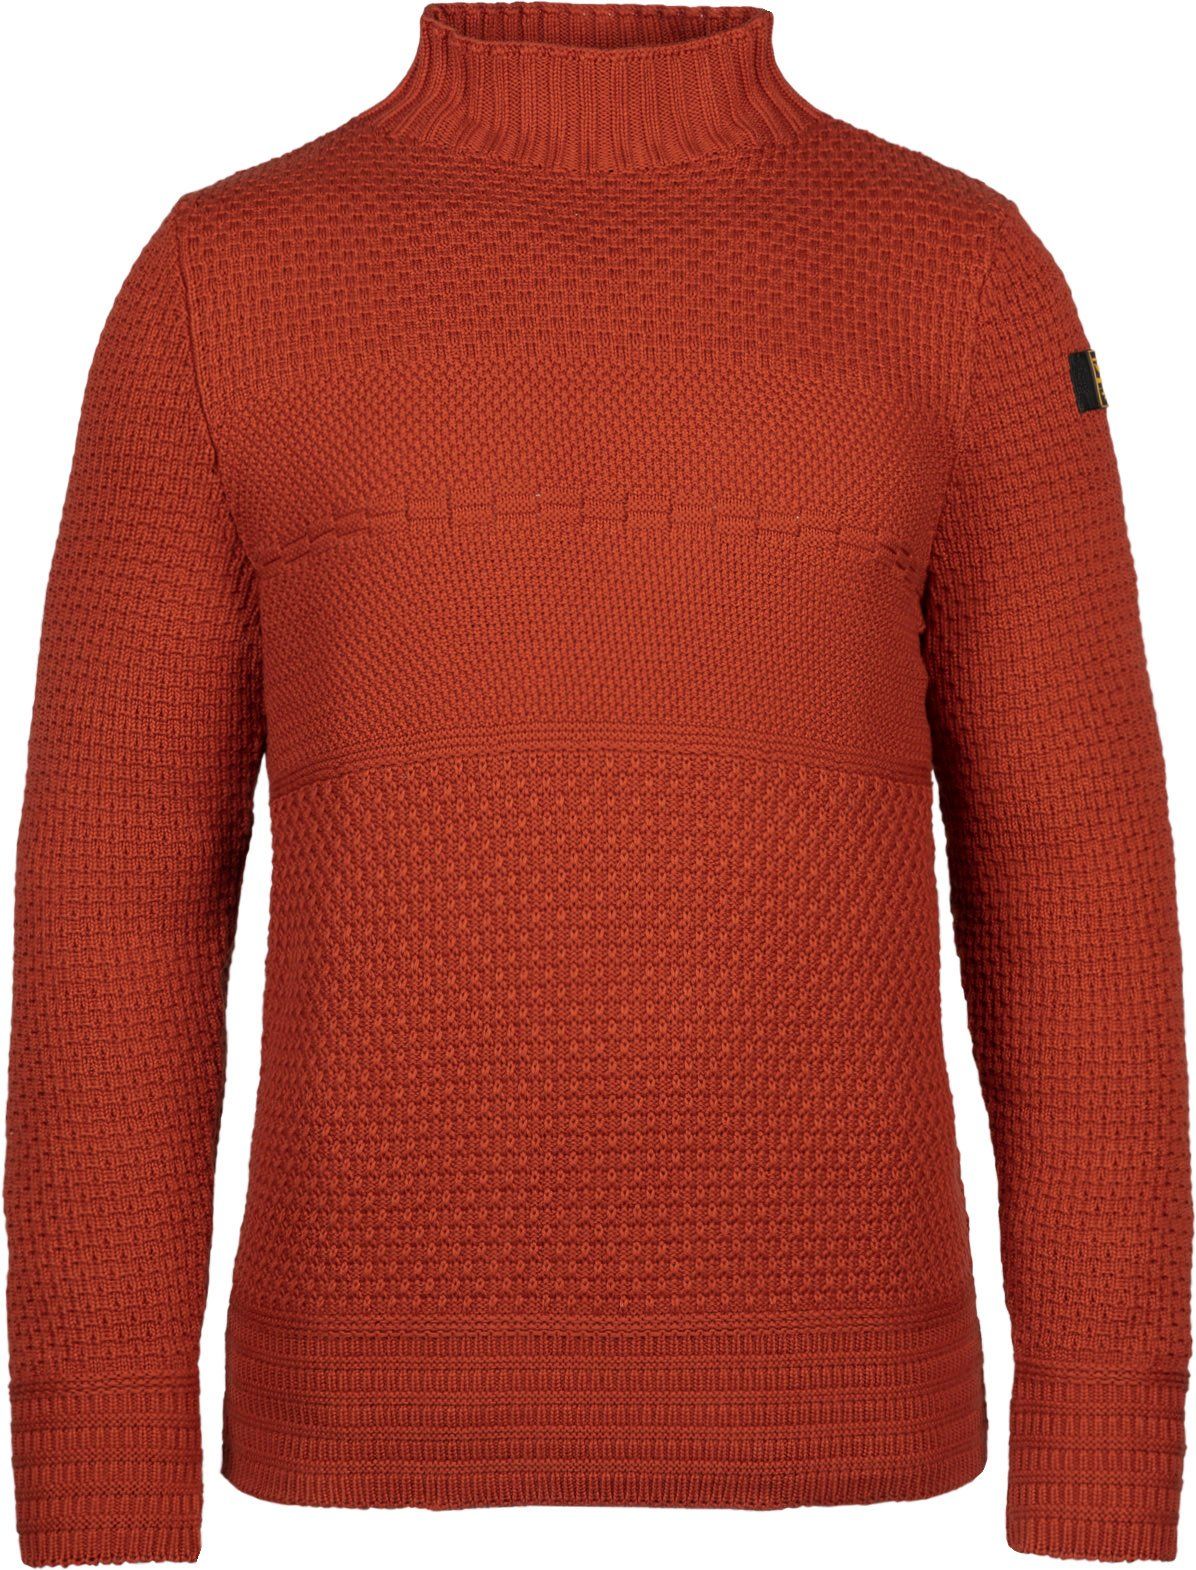 PME Legend Turtleneck Knitted Red size 3XL